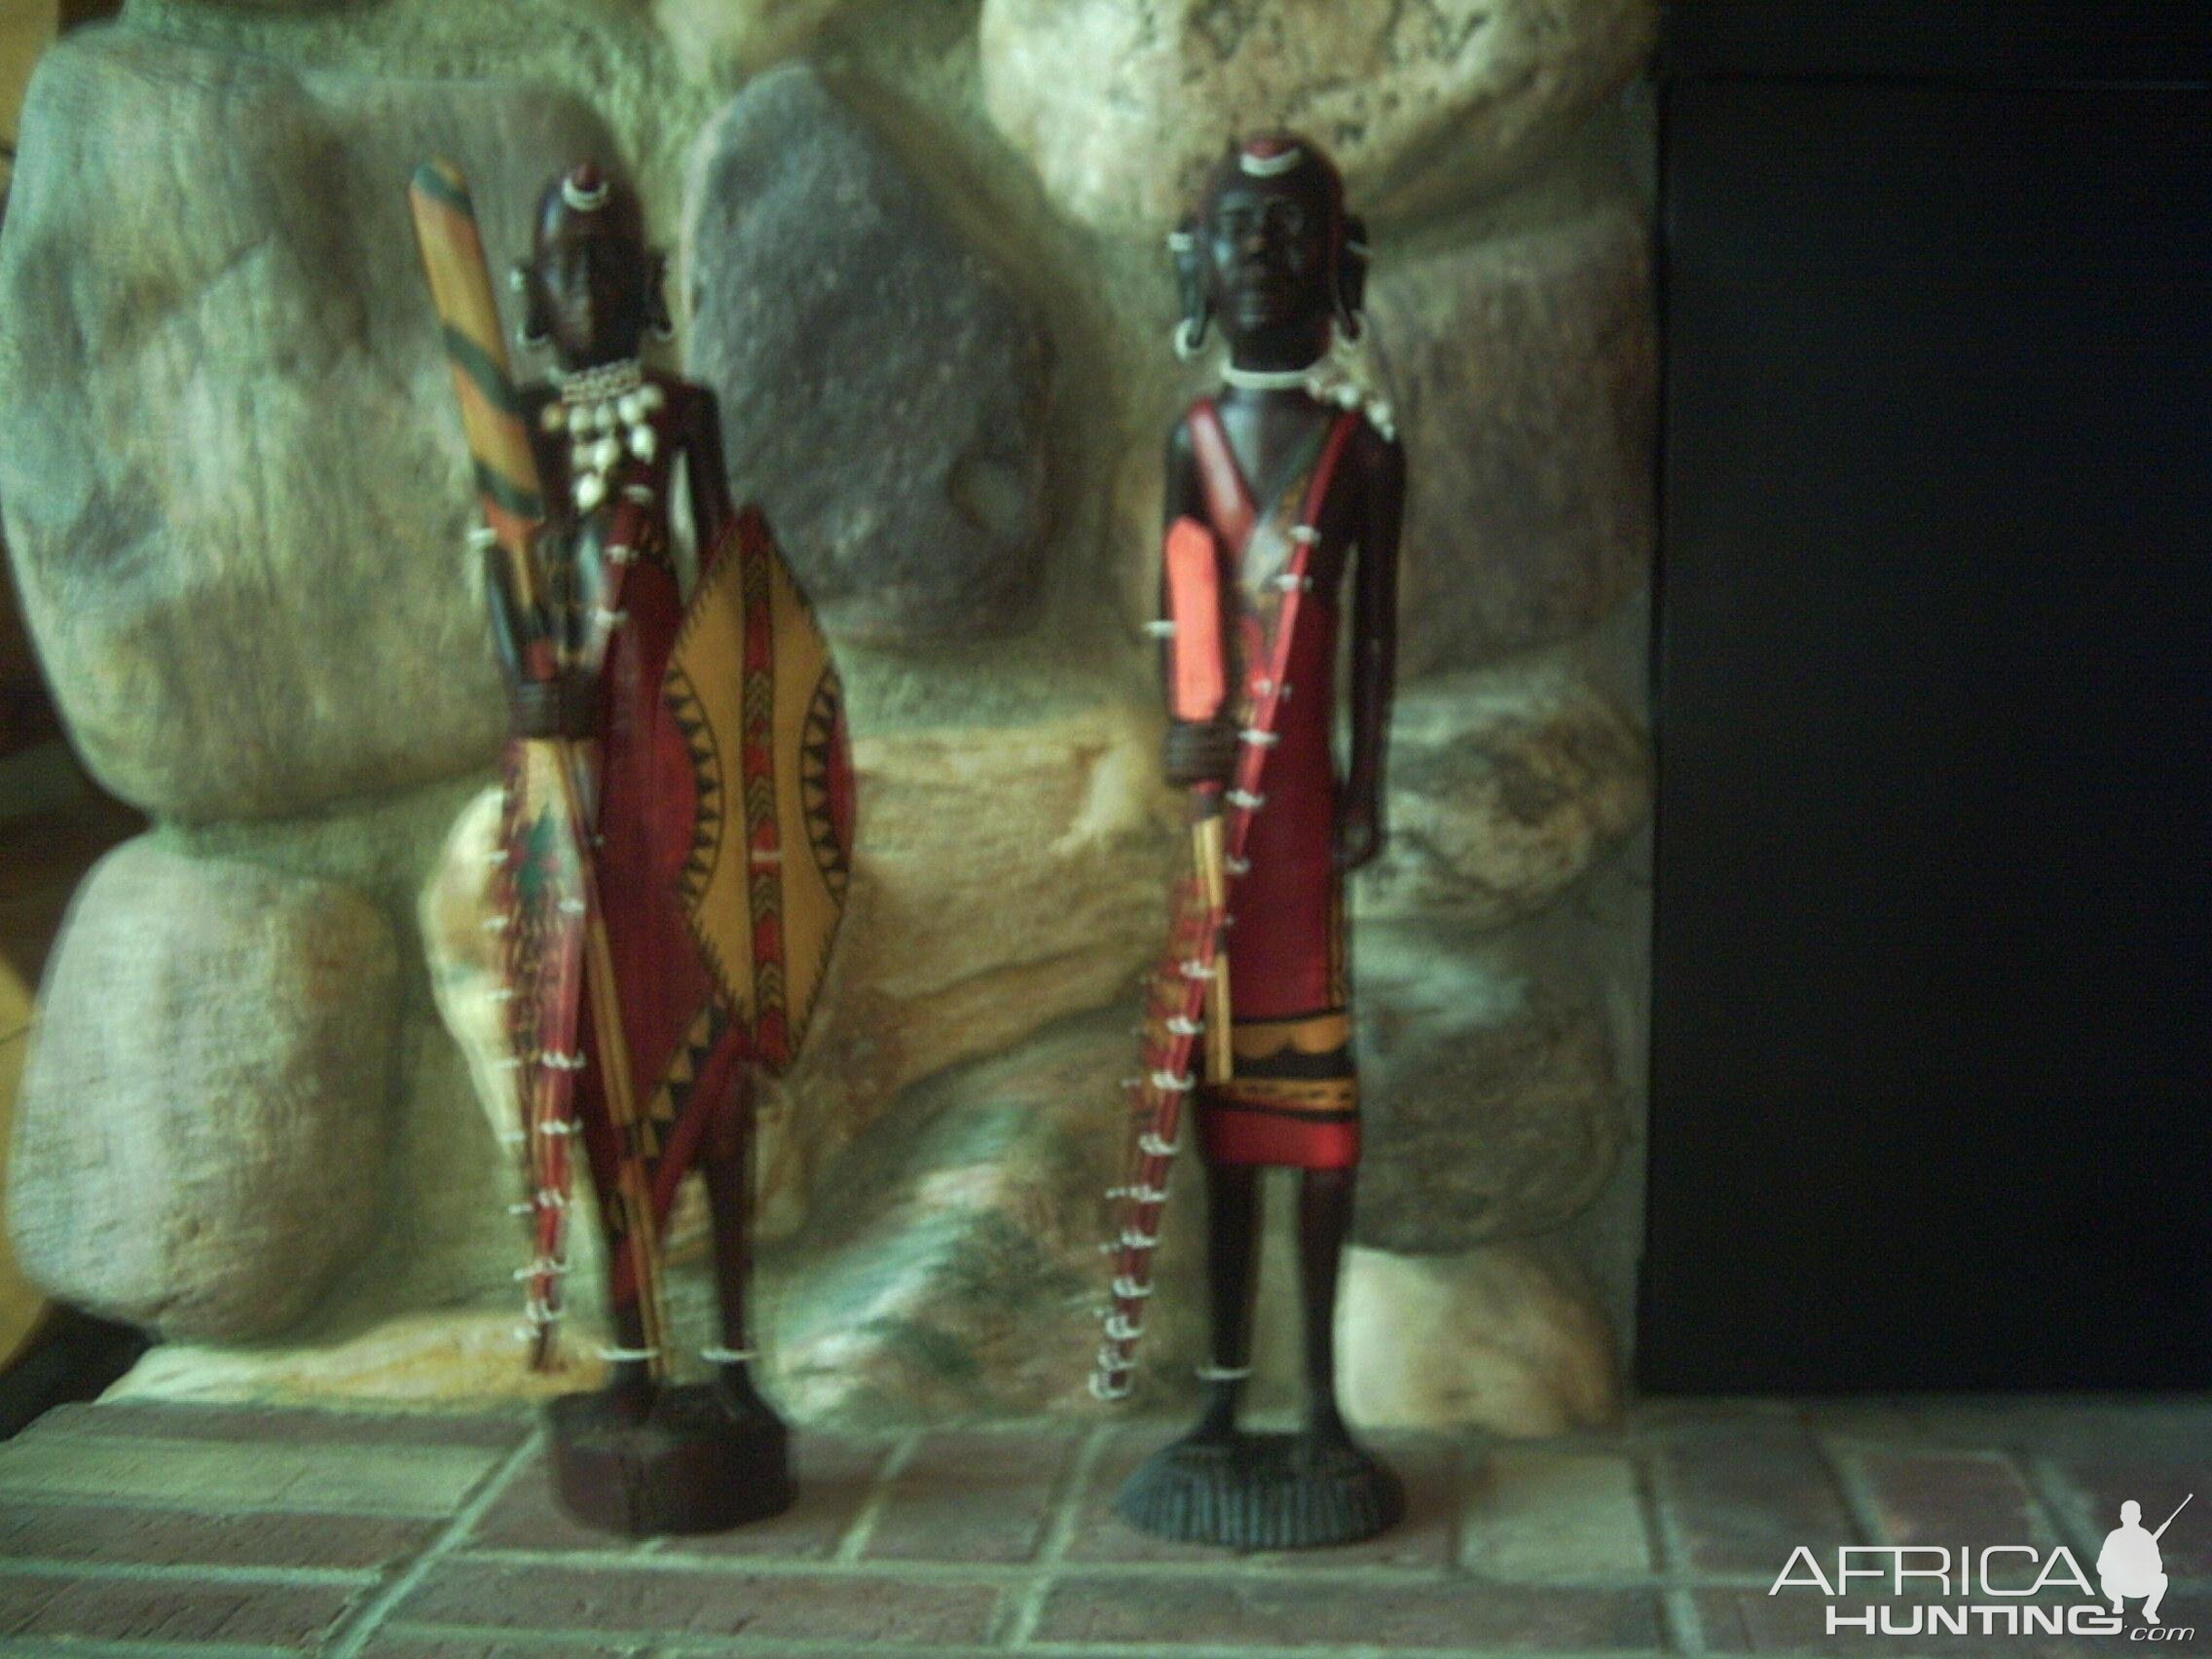 Masai warriors, picked up in africa in 2005